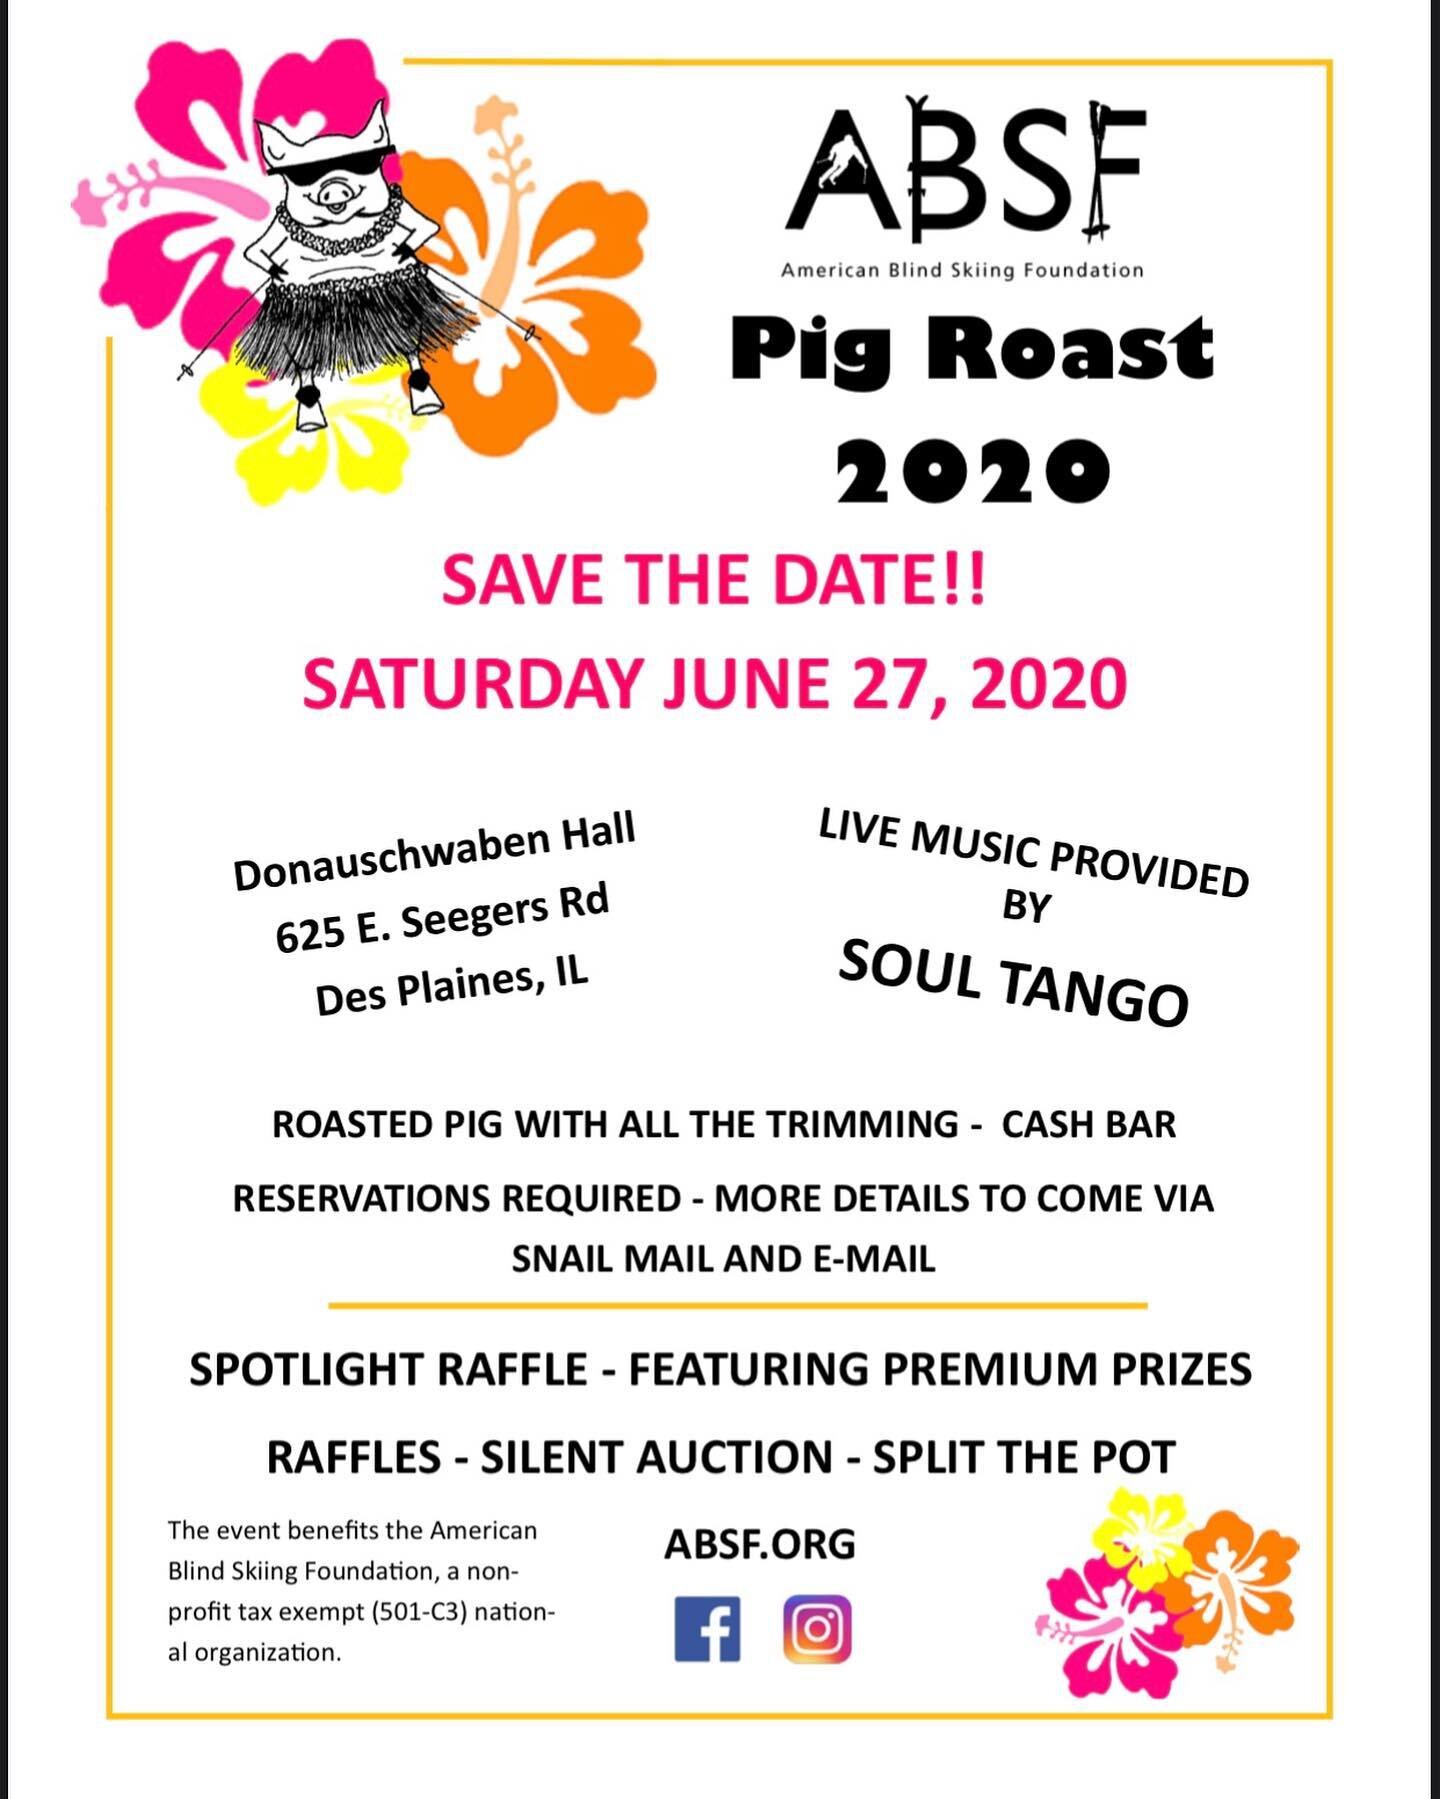 SAVE THE DATE! Join us for our annual Pig Roast Fundraiser! Help raise money for a great cause while having a good time!! Keep an eye on our Instagram and Facebook for more details! 🎉 -
-
-
-
-
-
-
-
-
#ABSF #helpthecause #fundraiser #pigroast #chic